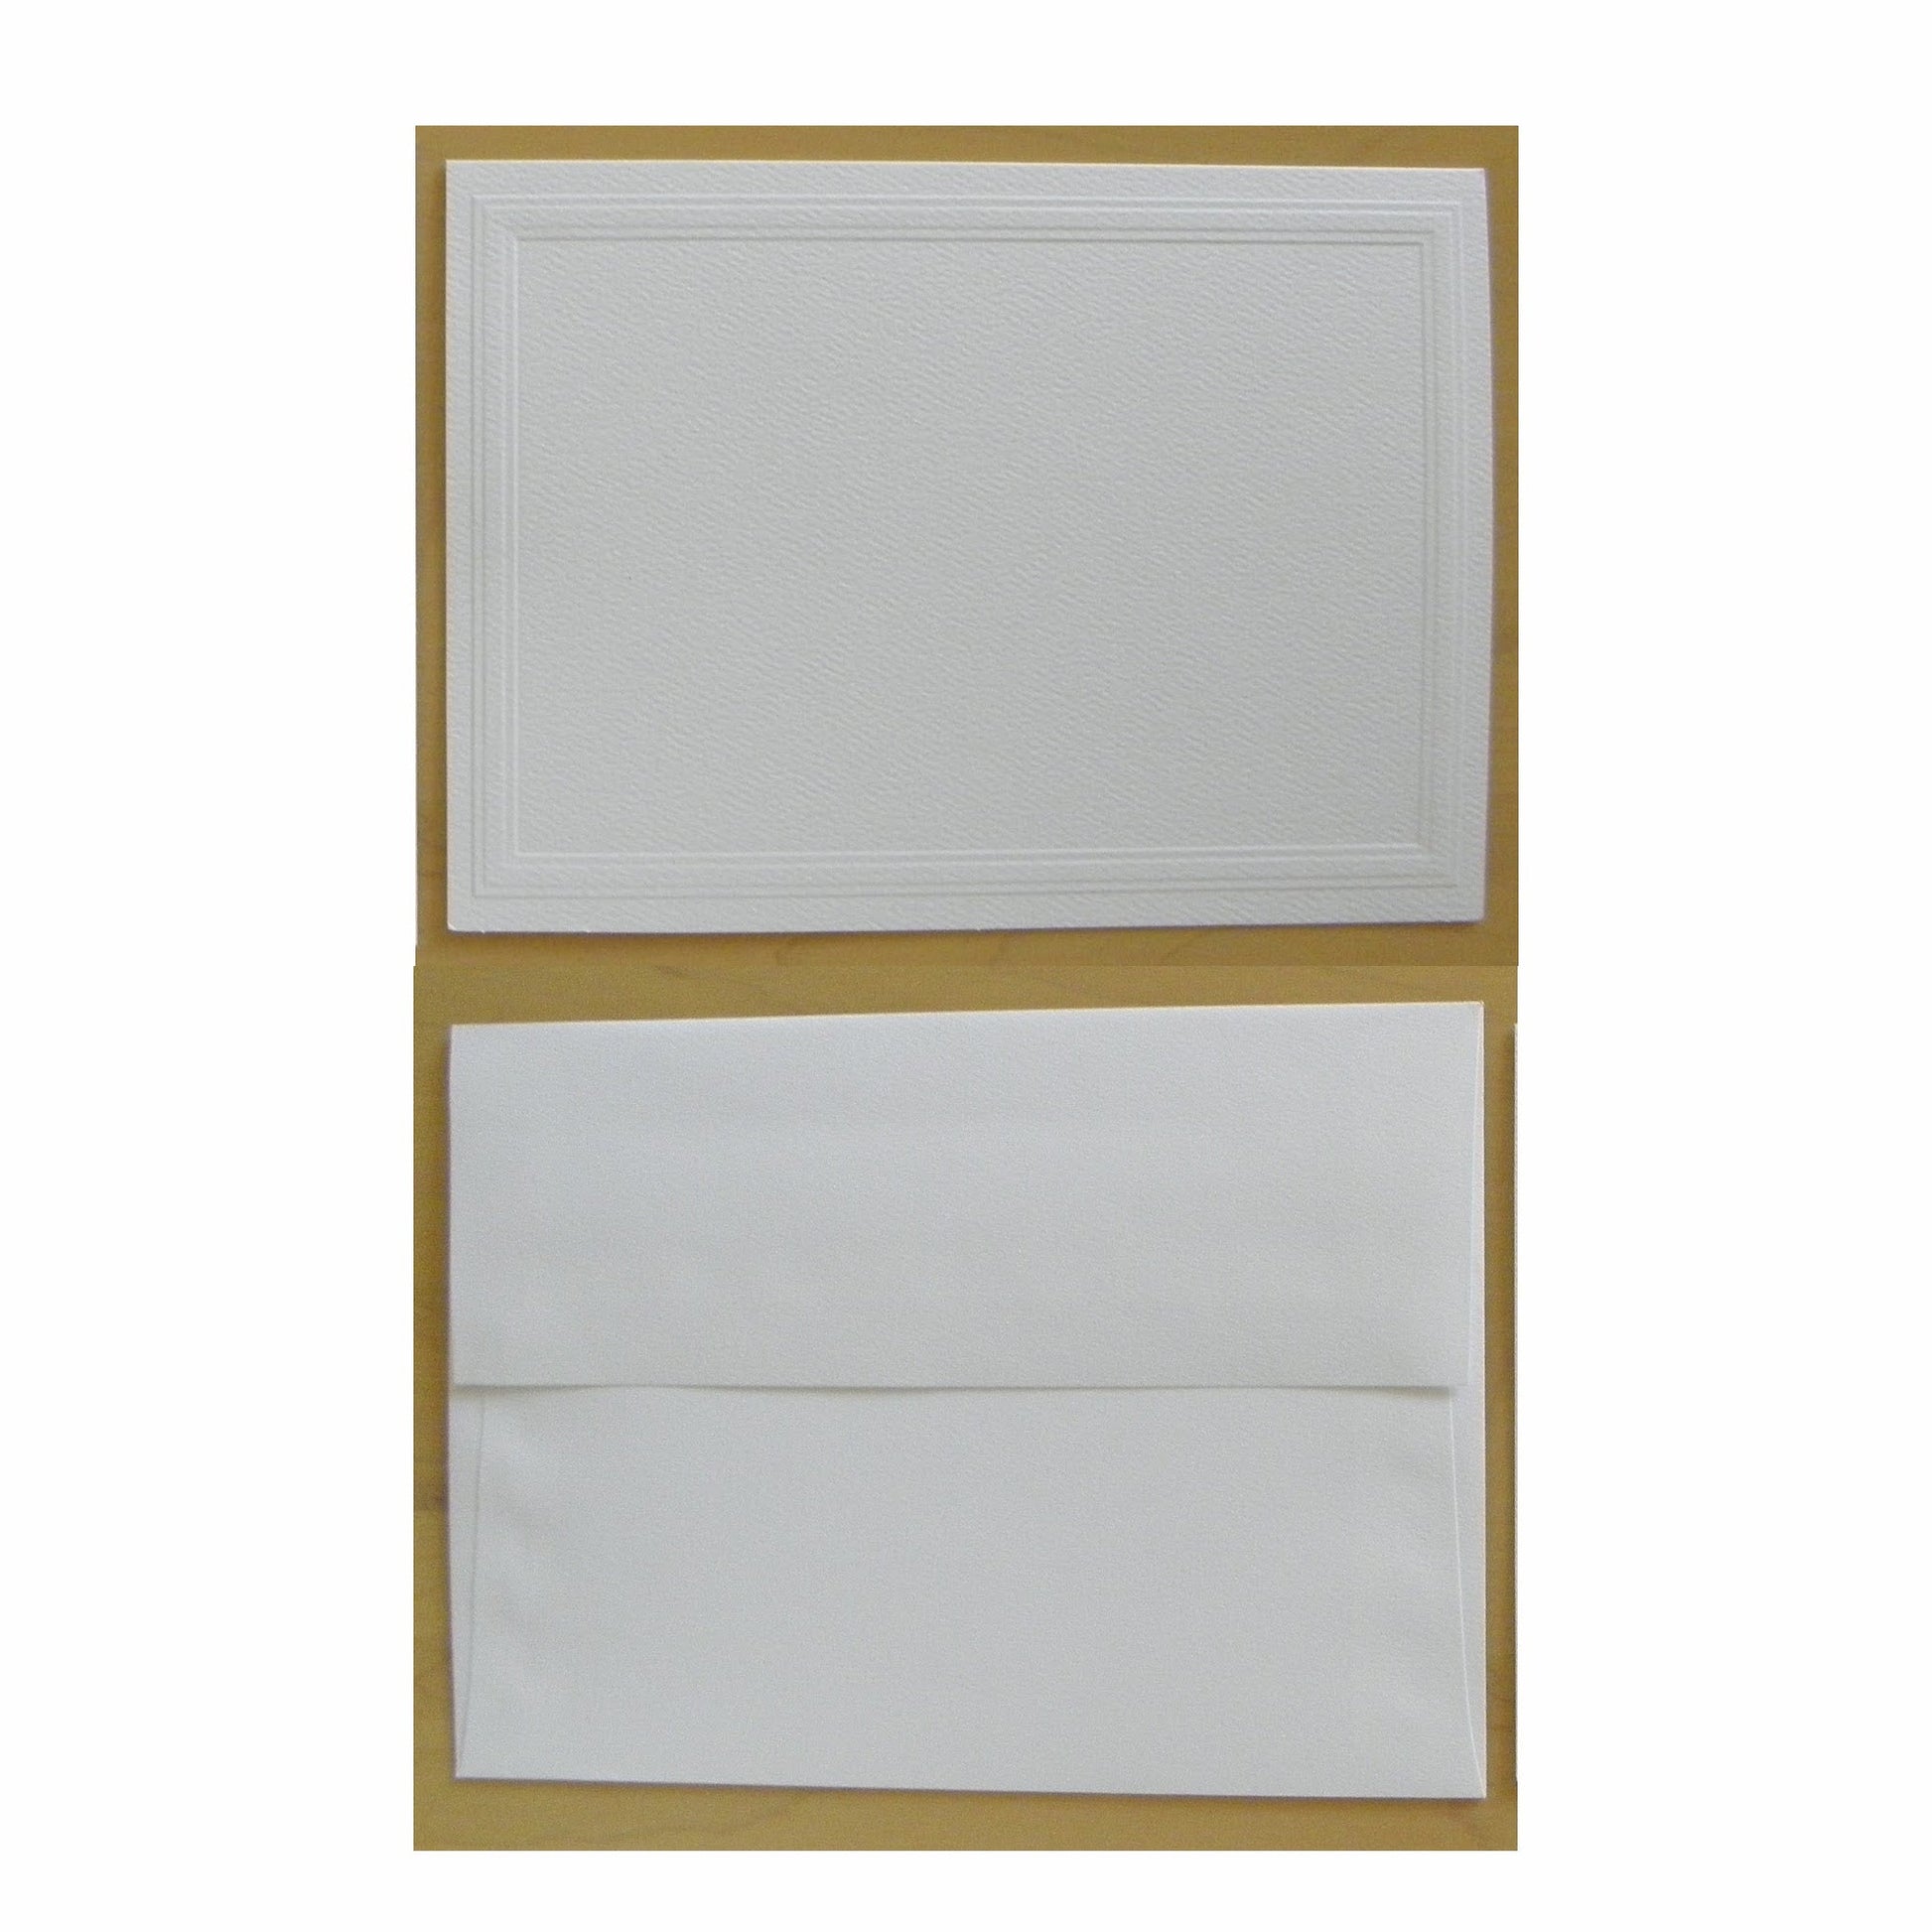 Photo of the Classic Cardstock and Envelope